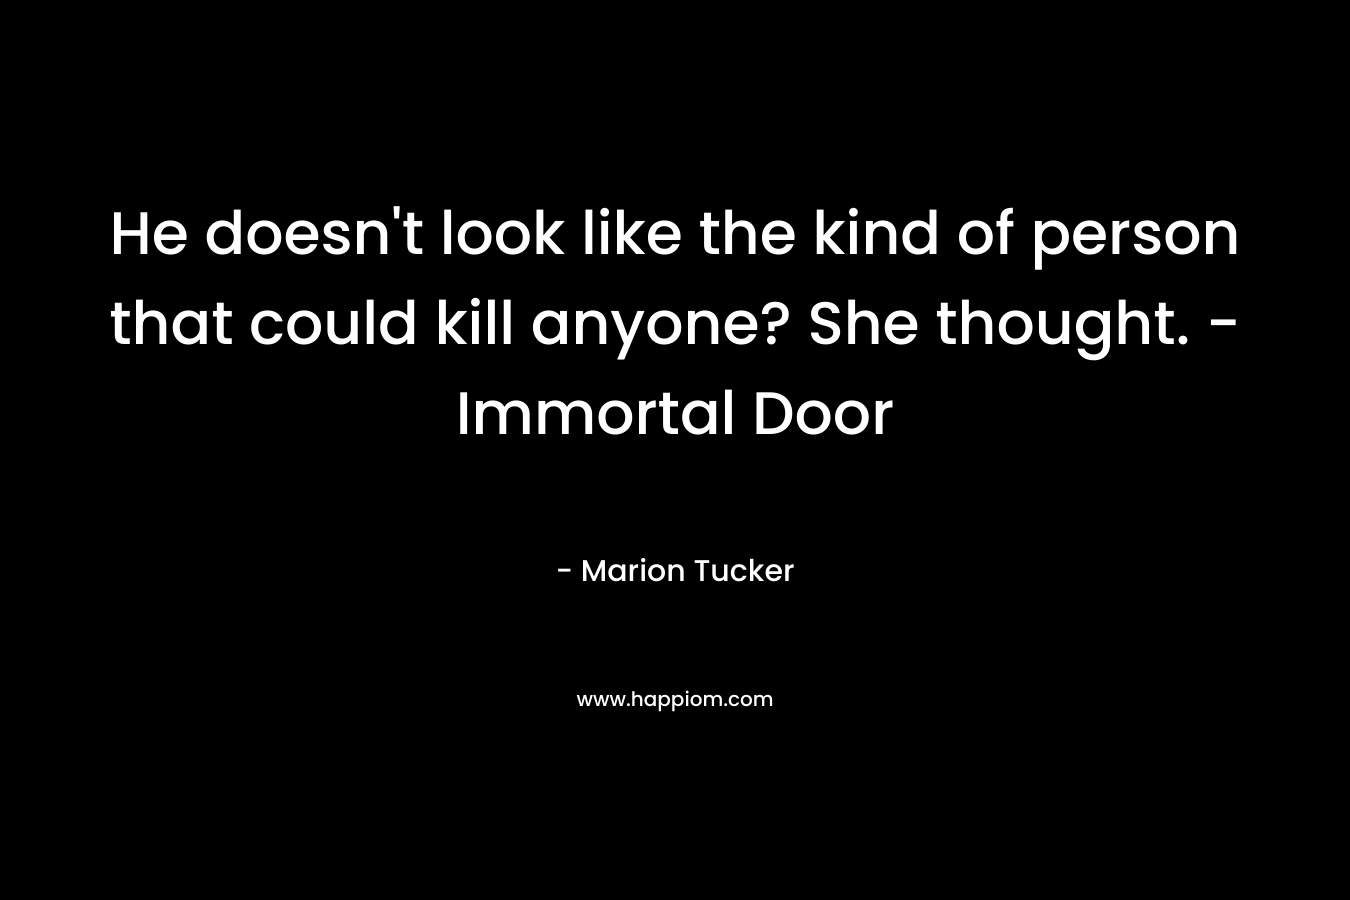 He doesn't look like the kind of person that could kill anyone? She thought. - Immortal Door